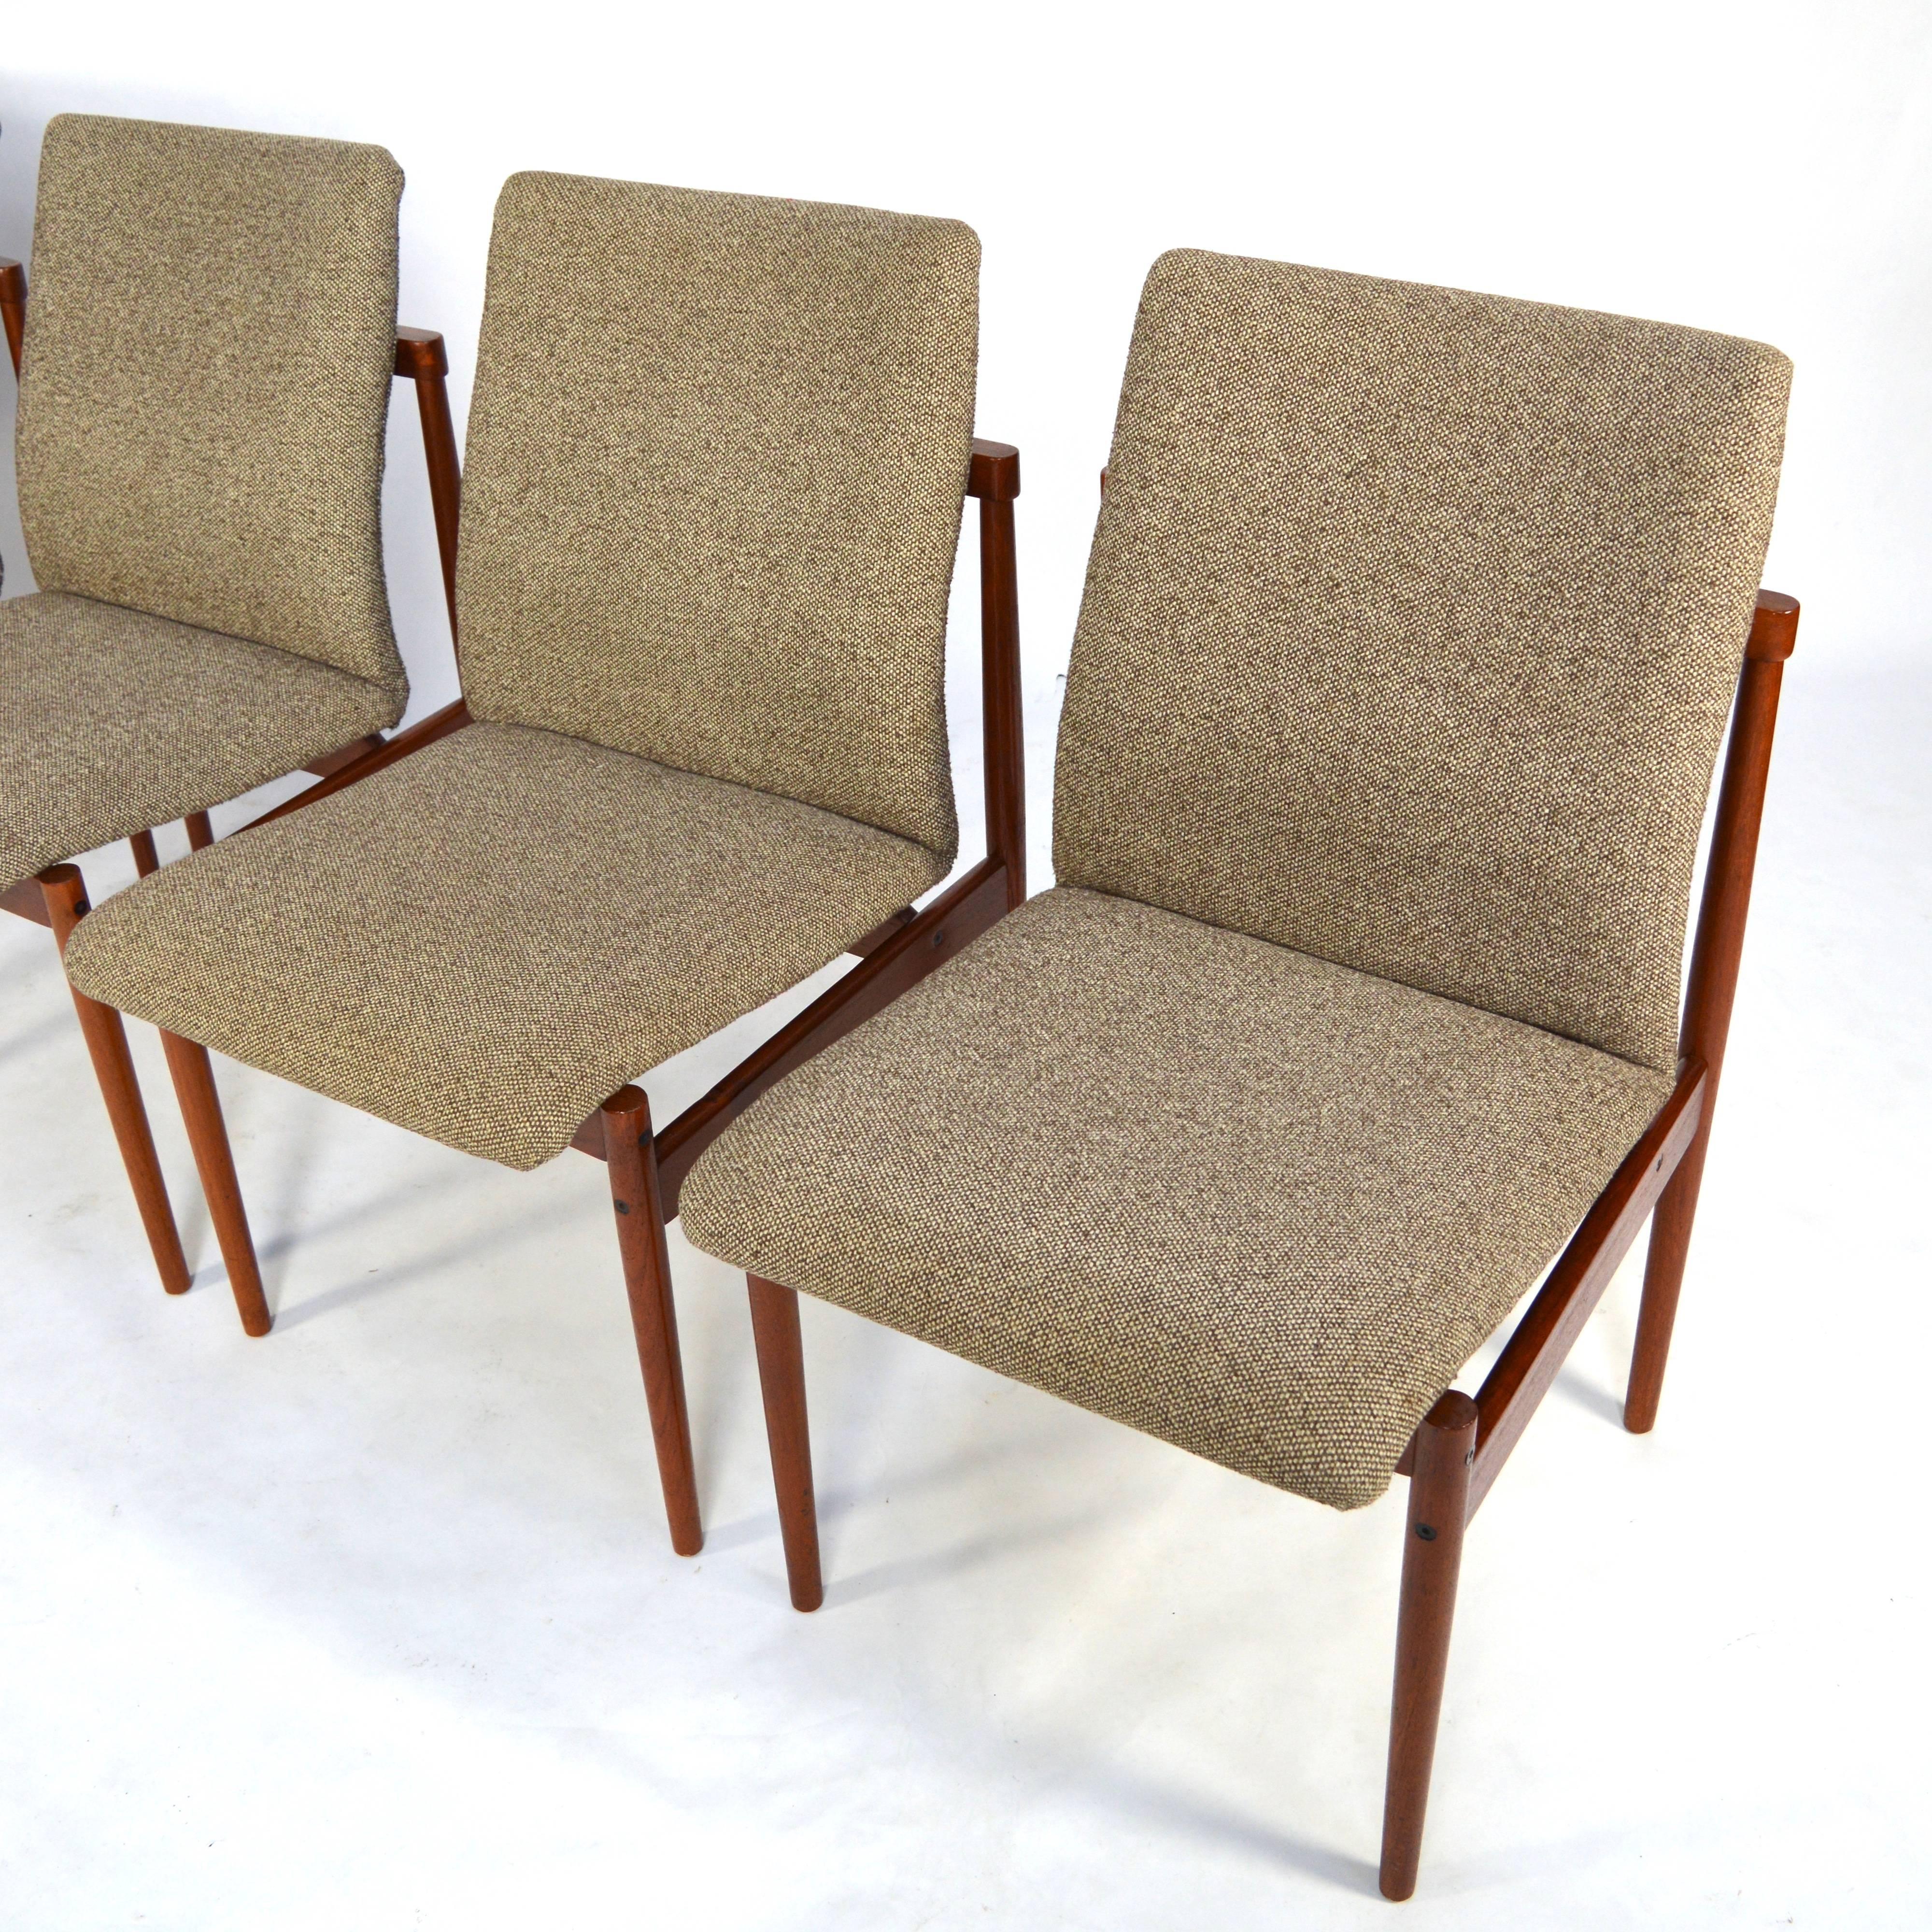 Mid-Century Modern Set of Four Teak Dining Chairs by Thereca, 1960s